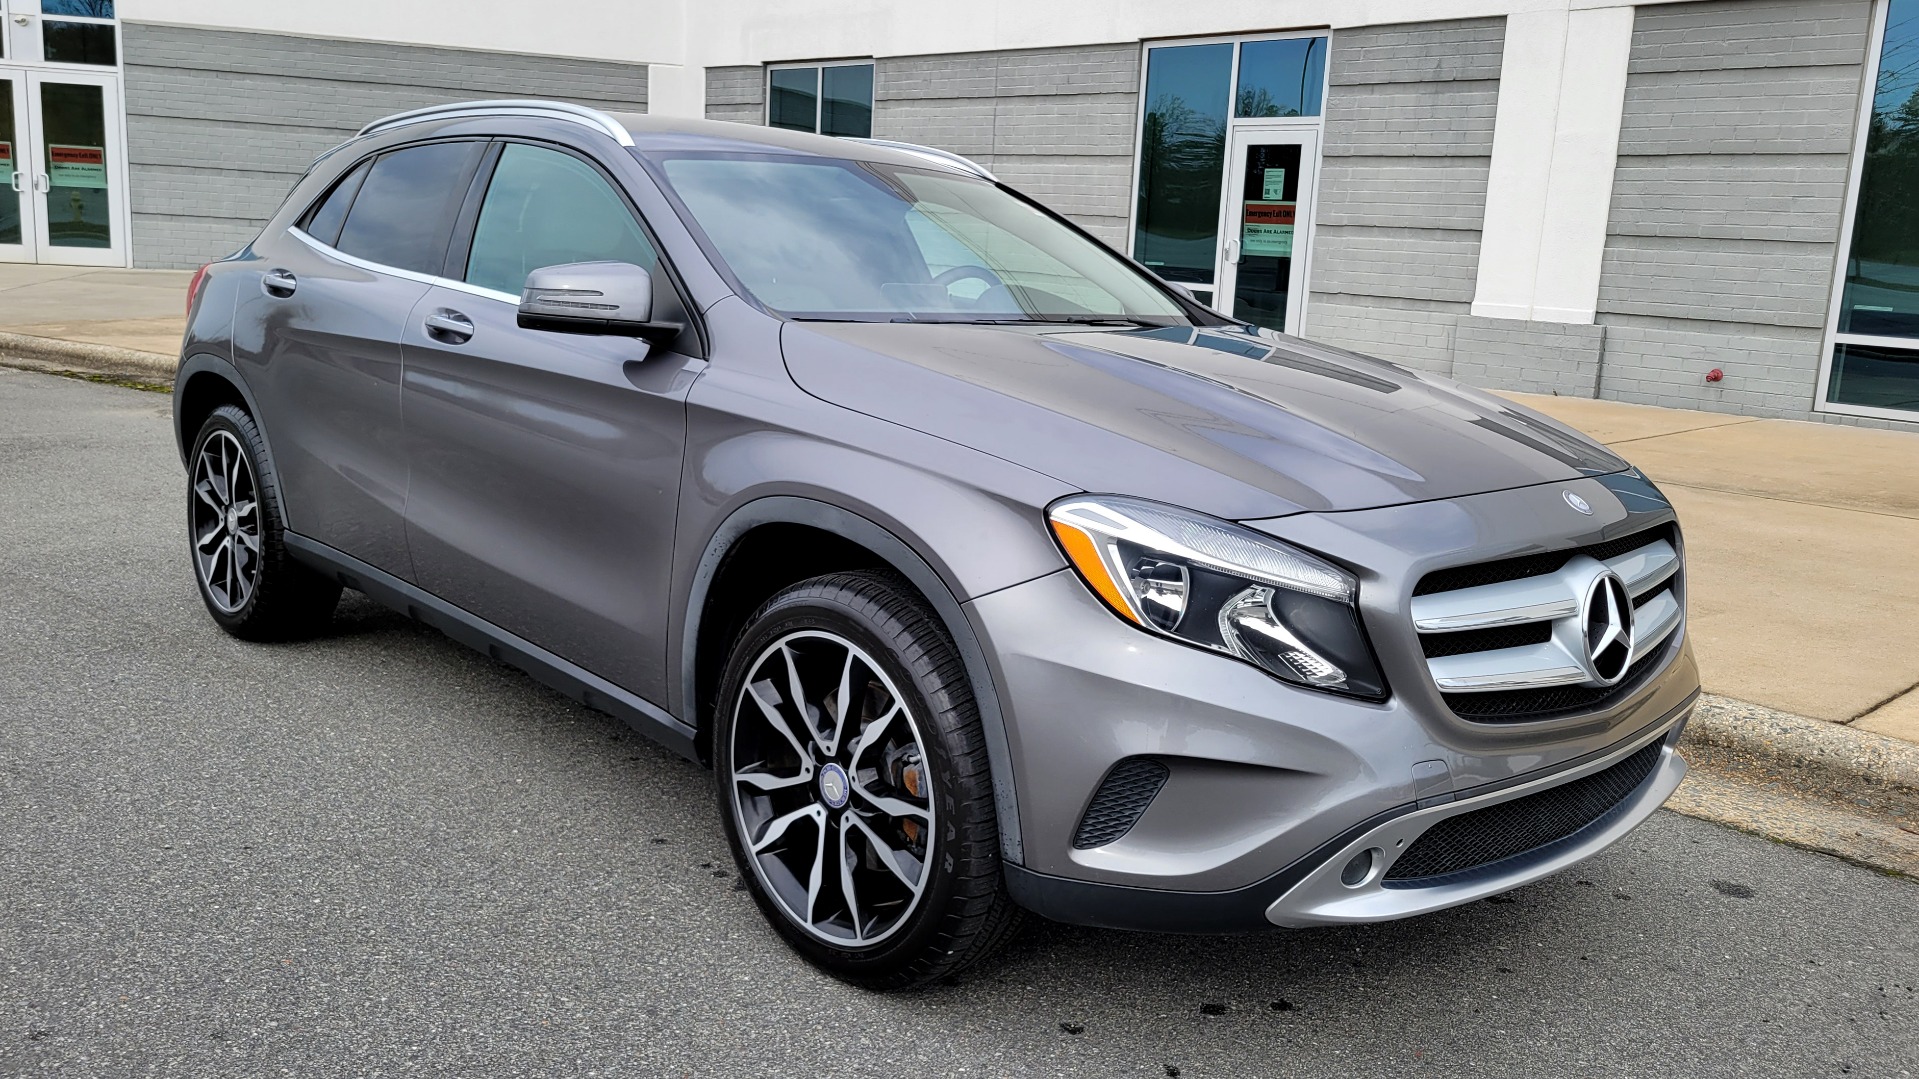 Used 2017 Mercedes-Benz GLA 250 2.0L SUV / APPLE CARPLAY / BLIND SPOT / KEYLESS-GO for sale $26,795 at Formula Imports in Charlotte NC 28227 5